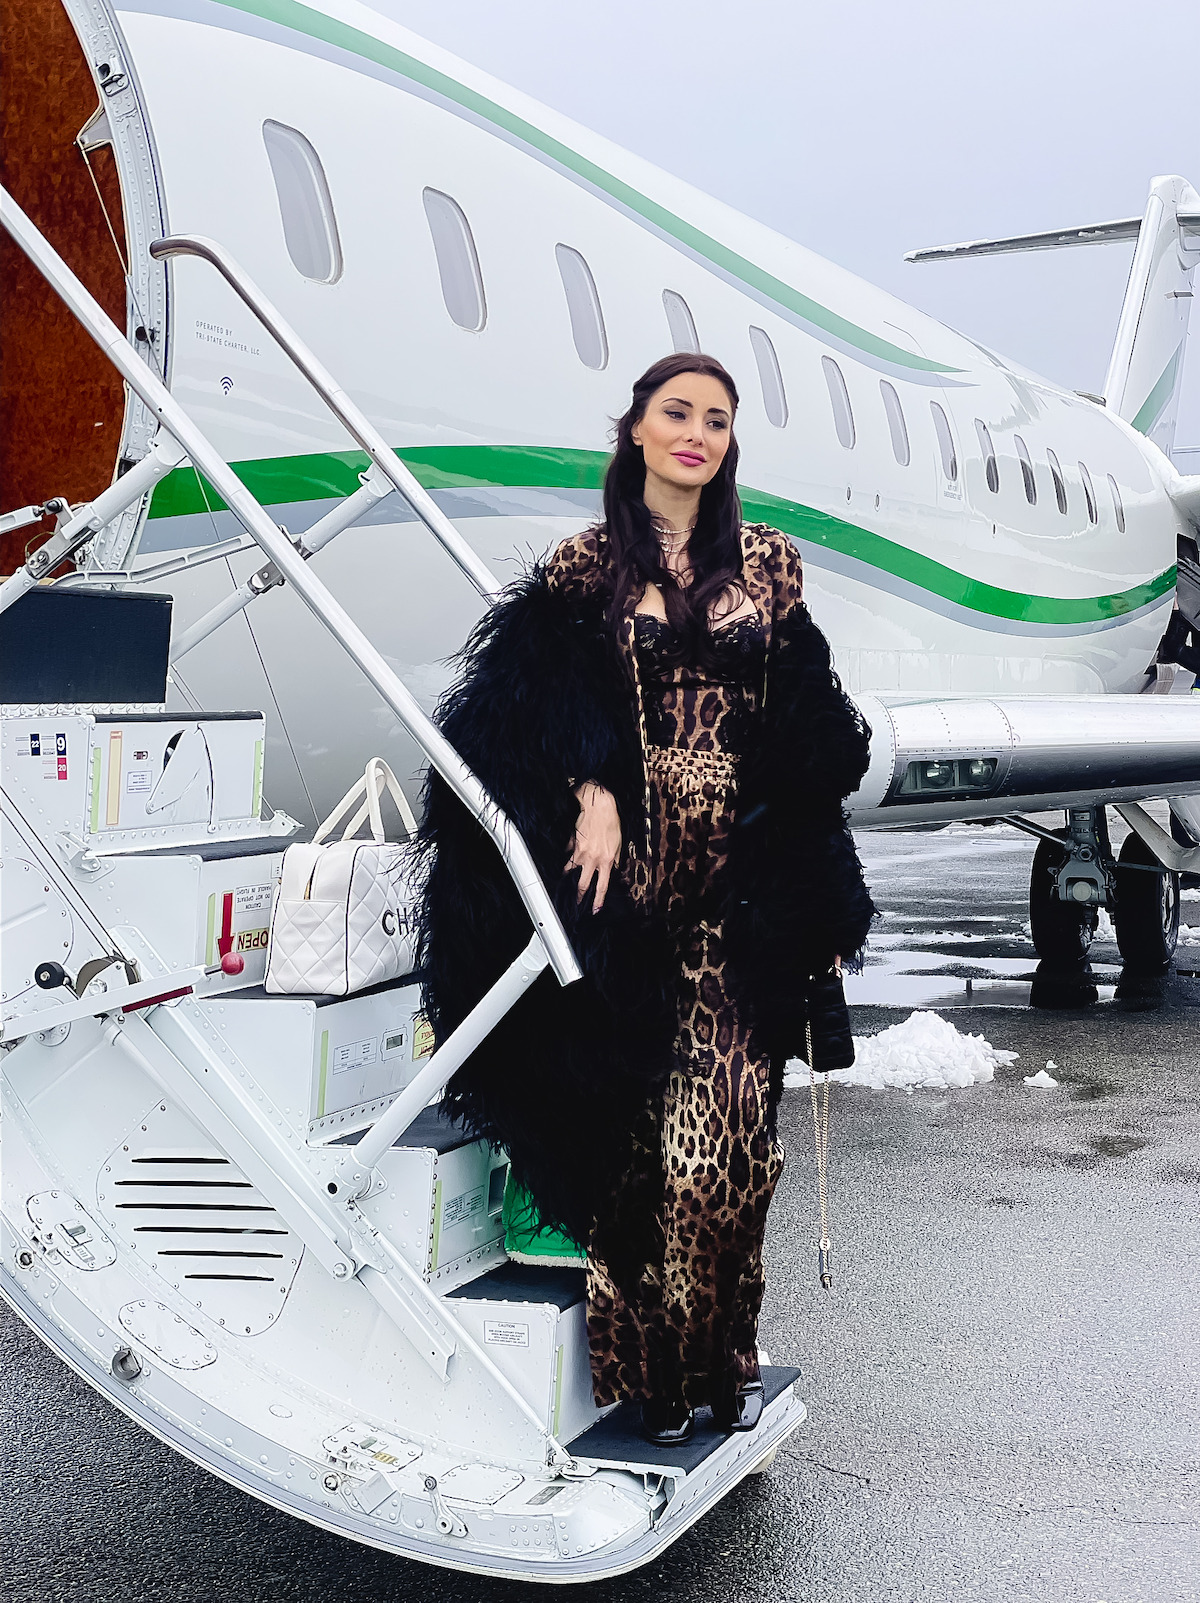 Meet the 7 crazy rich Asians from Bling Empire: New York – billionaire  heiress Dorothy Wang leads the pack alongside Hong Kong's Stephen and  Deborah Hung, and fashion influencer Tina Leung